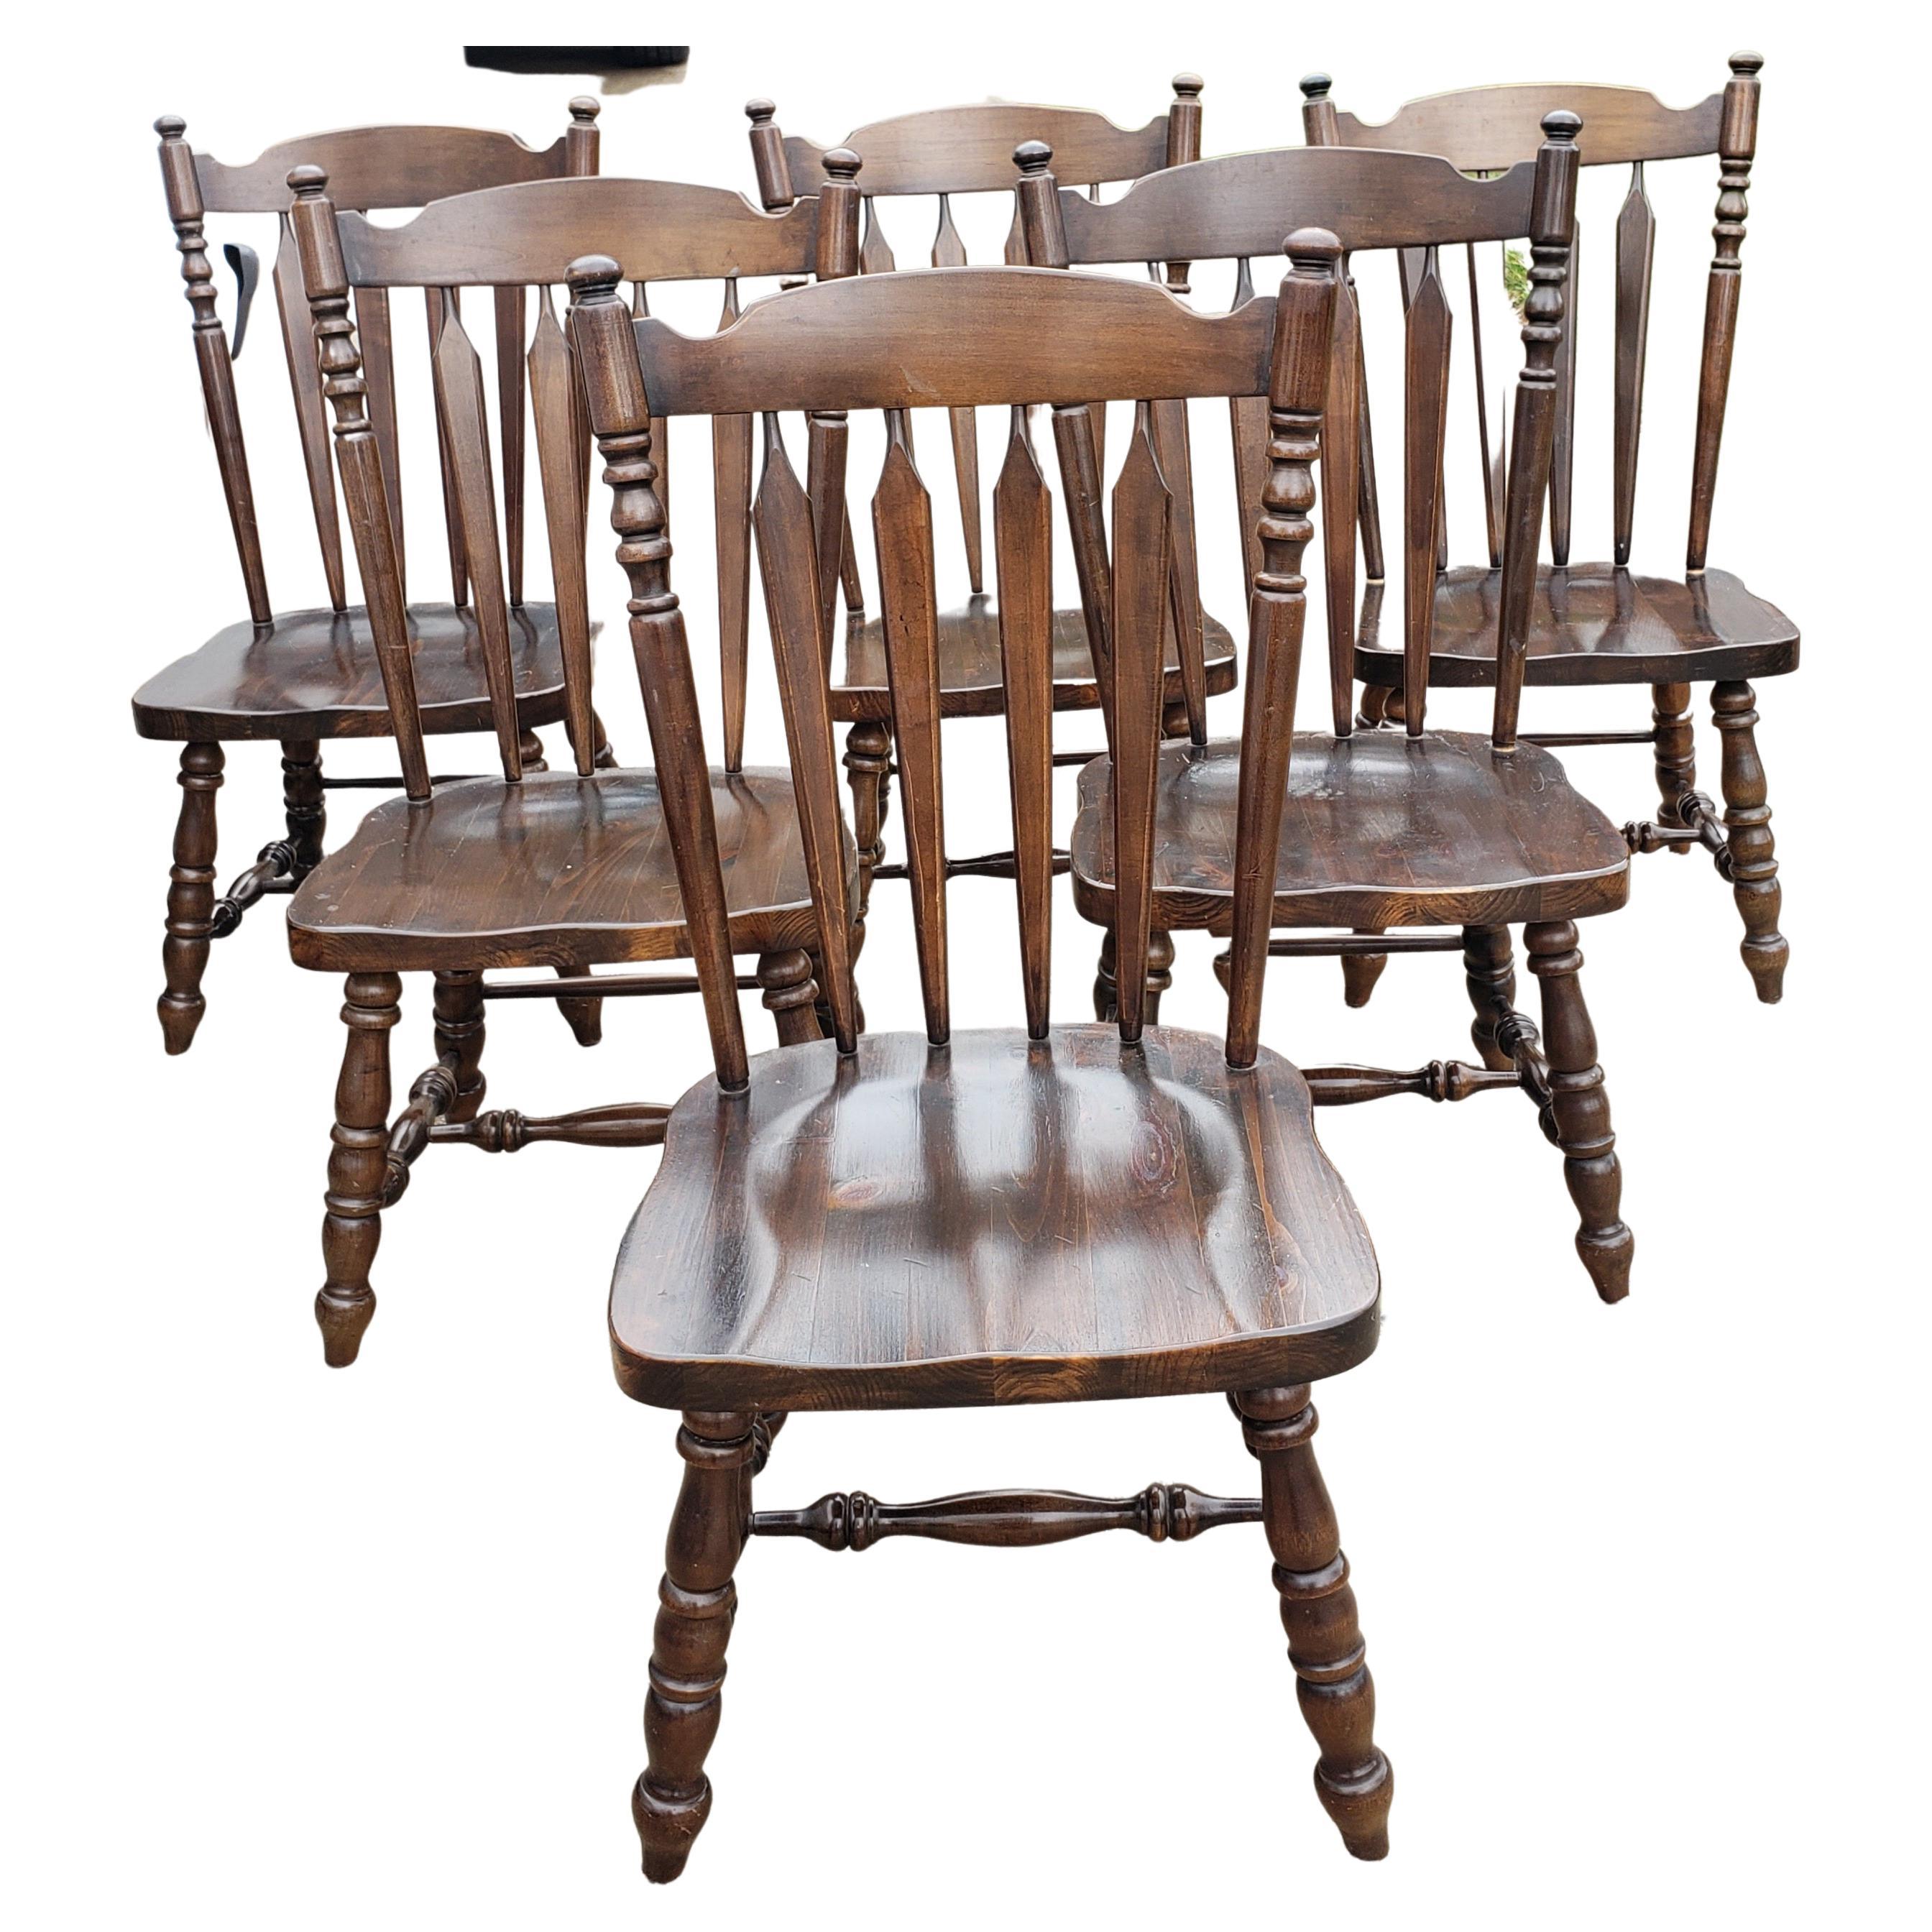 A beautiful set of 6 high back heavy duty solid pine country dining chairs.
 Extremely solid heavy duty chairs. High back 42